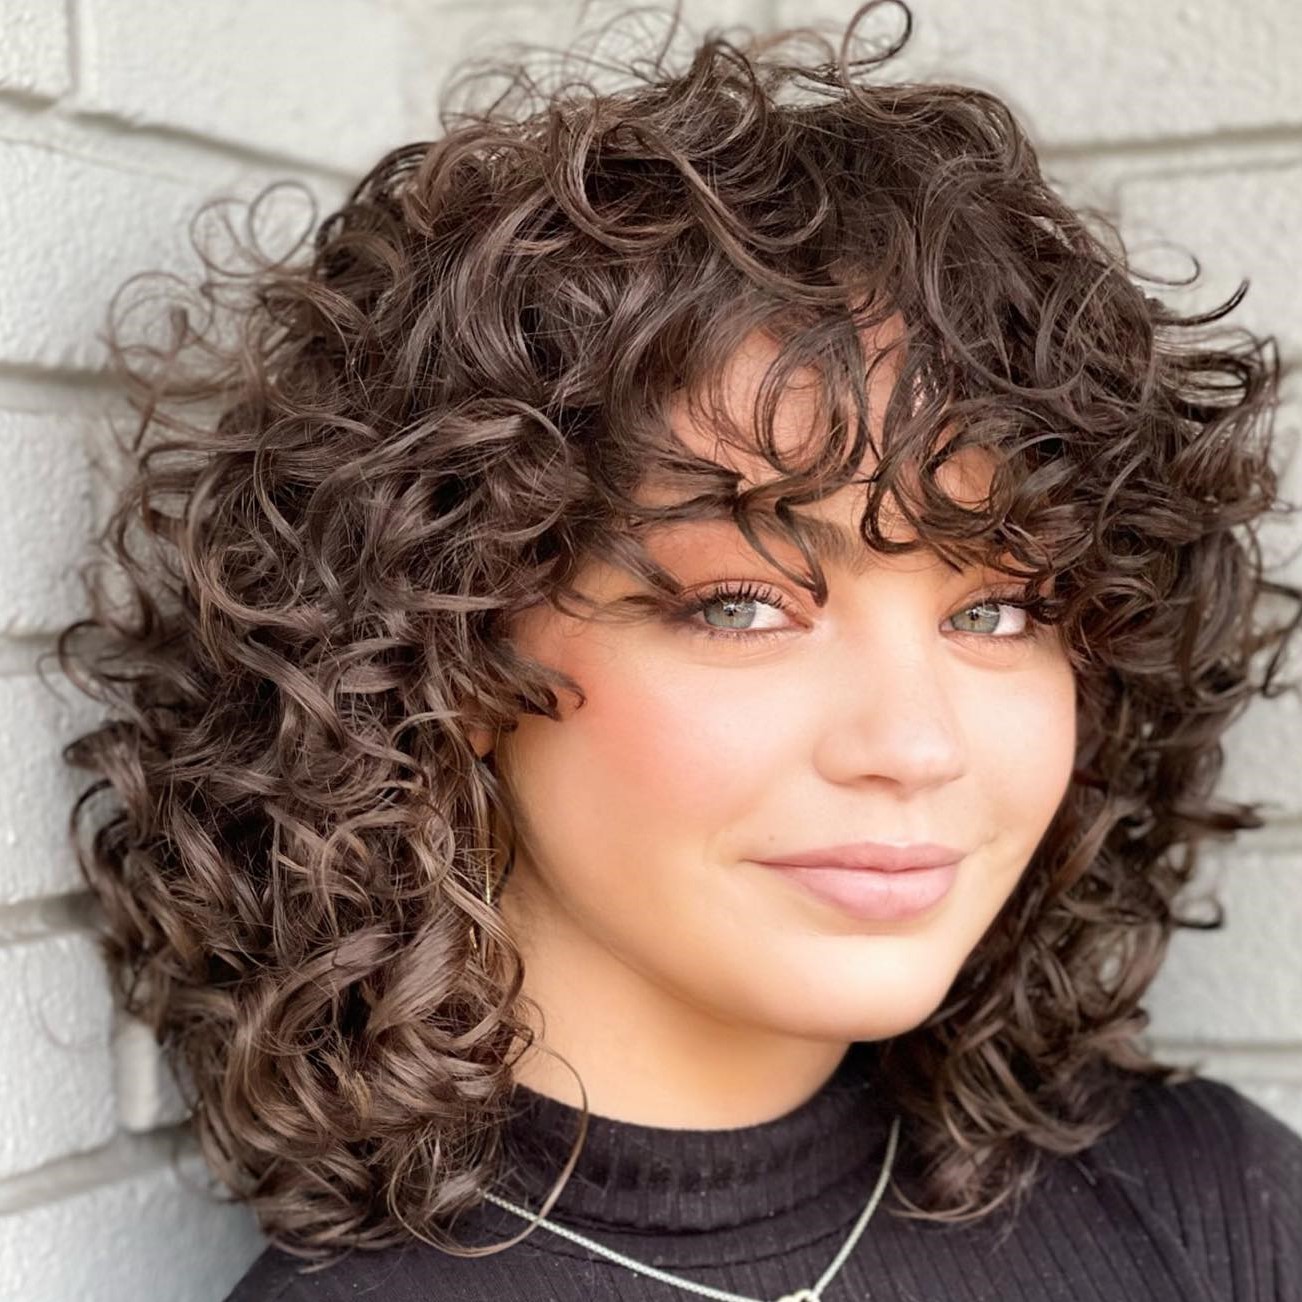 Best Hairstyles For Curly Hair Over 50